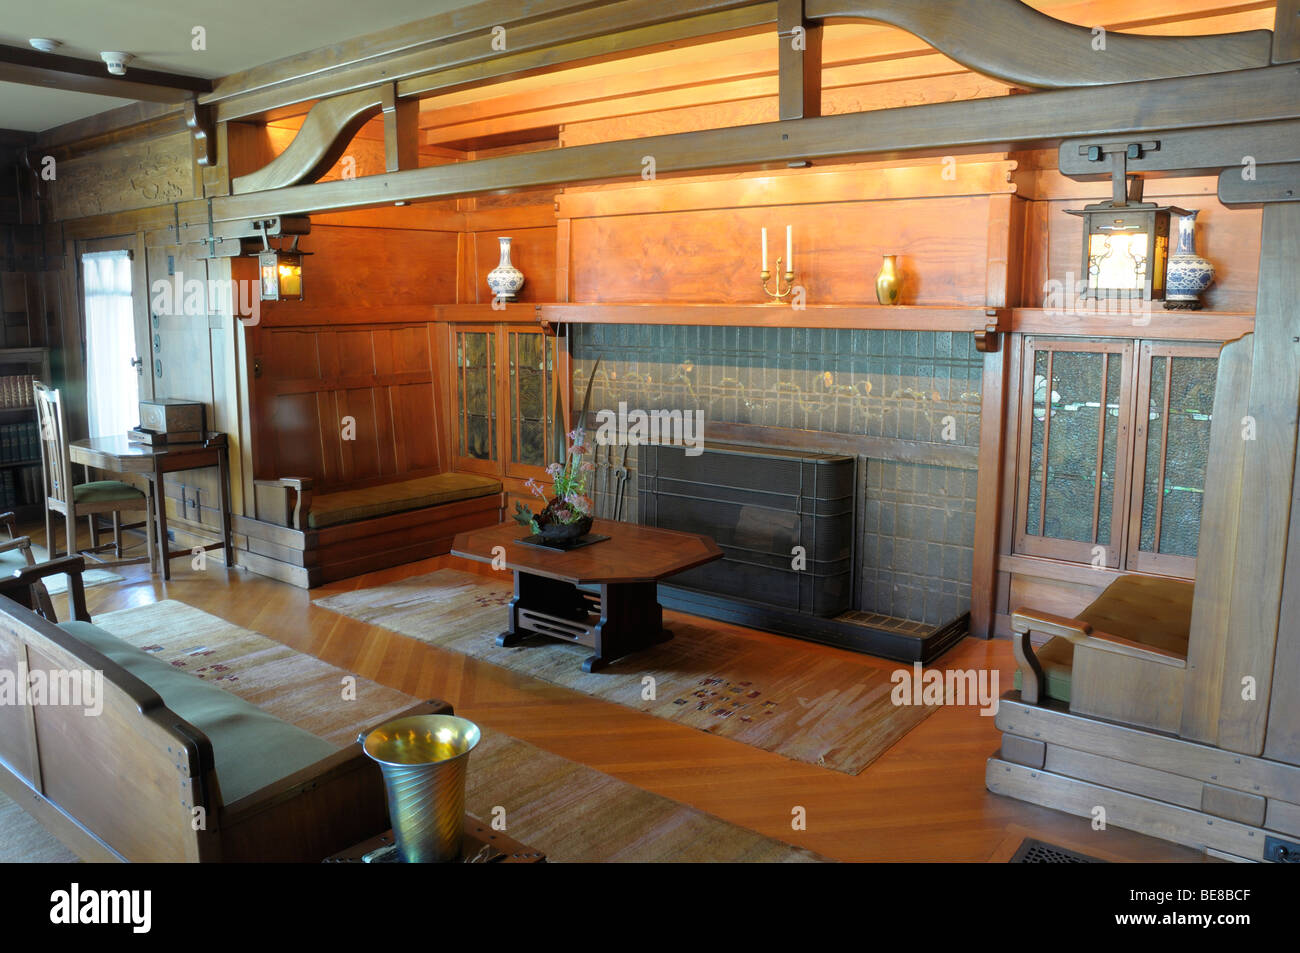 USA, California, Los Angeles, Living Room of The Gamble House in Pasadena American Arts & Crafts architecture by Greene & Greene Stock Photo